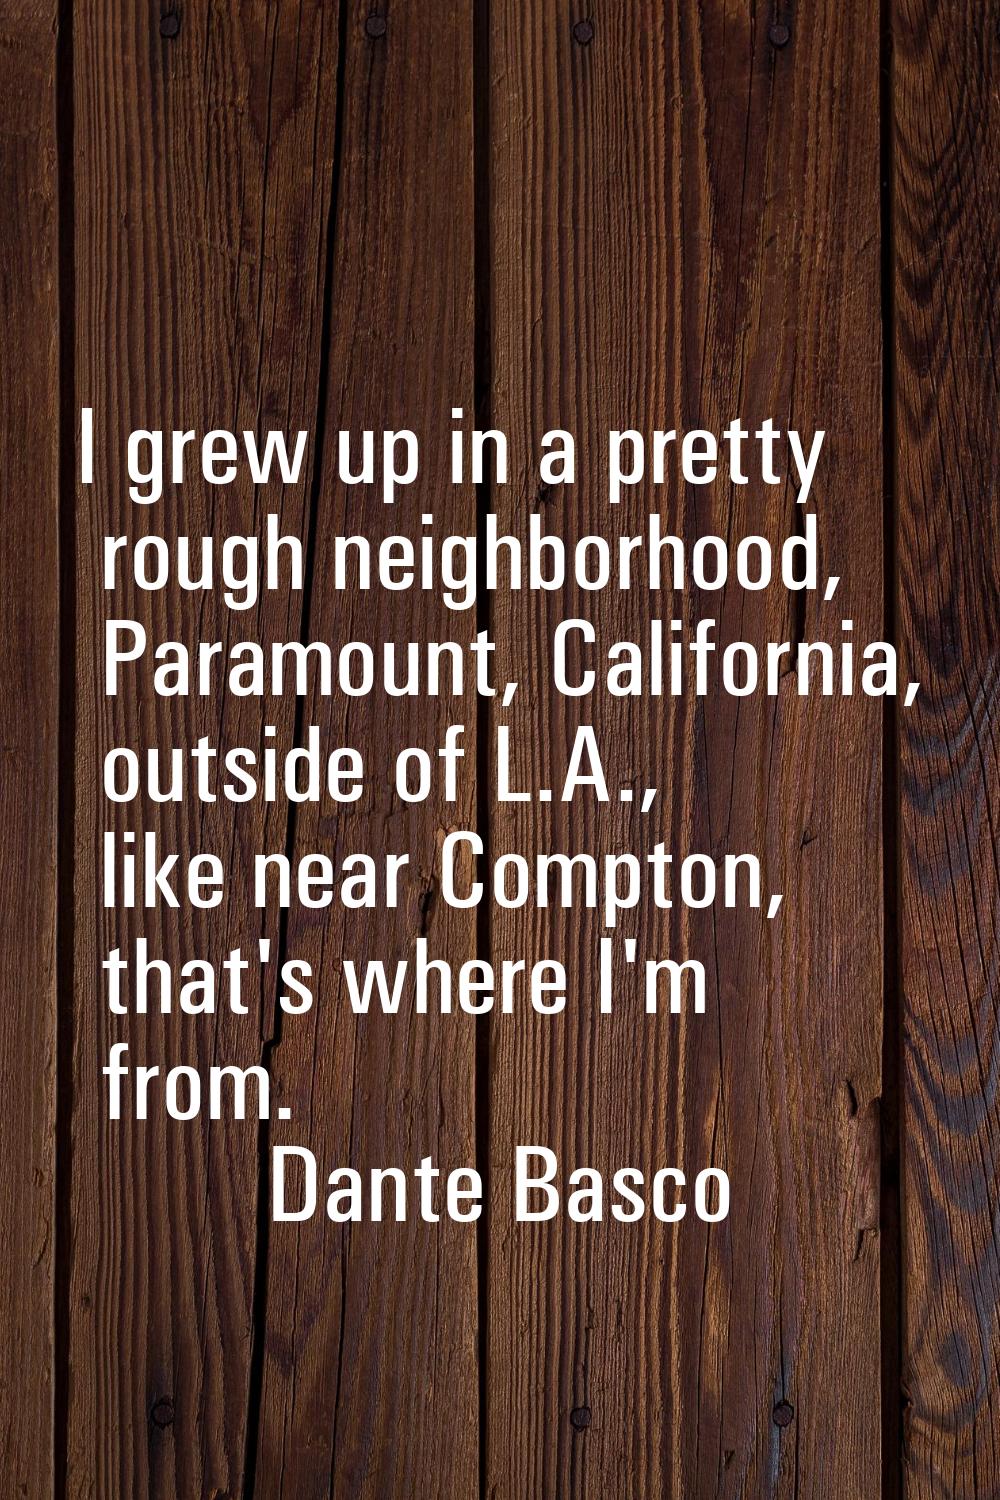 I grew up in a pretty rough neighborhood, Paramount, California, outside of L.A., like near Compton